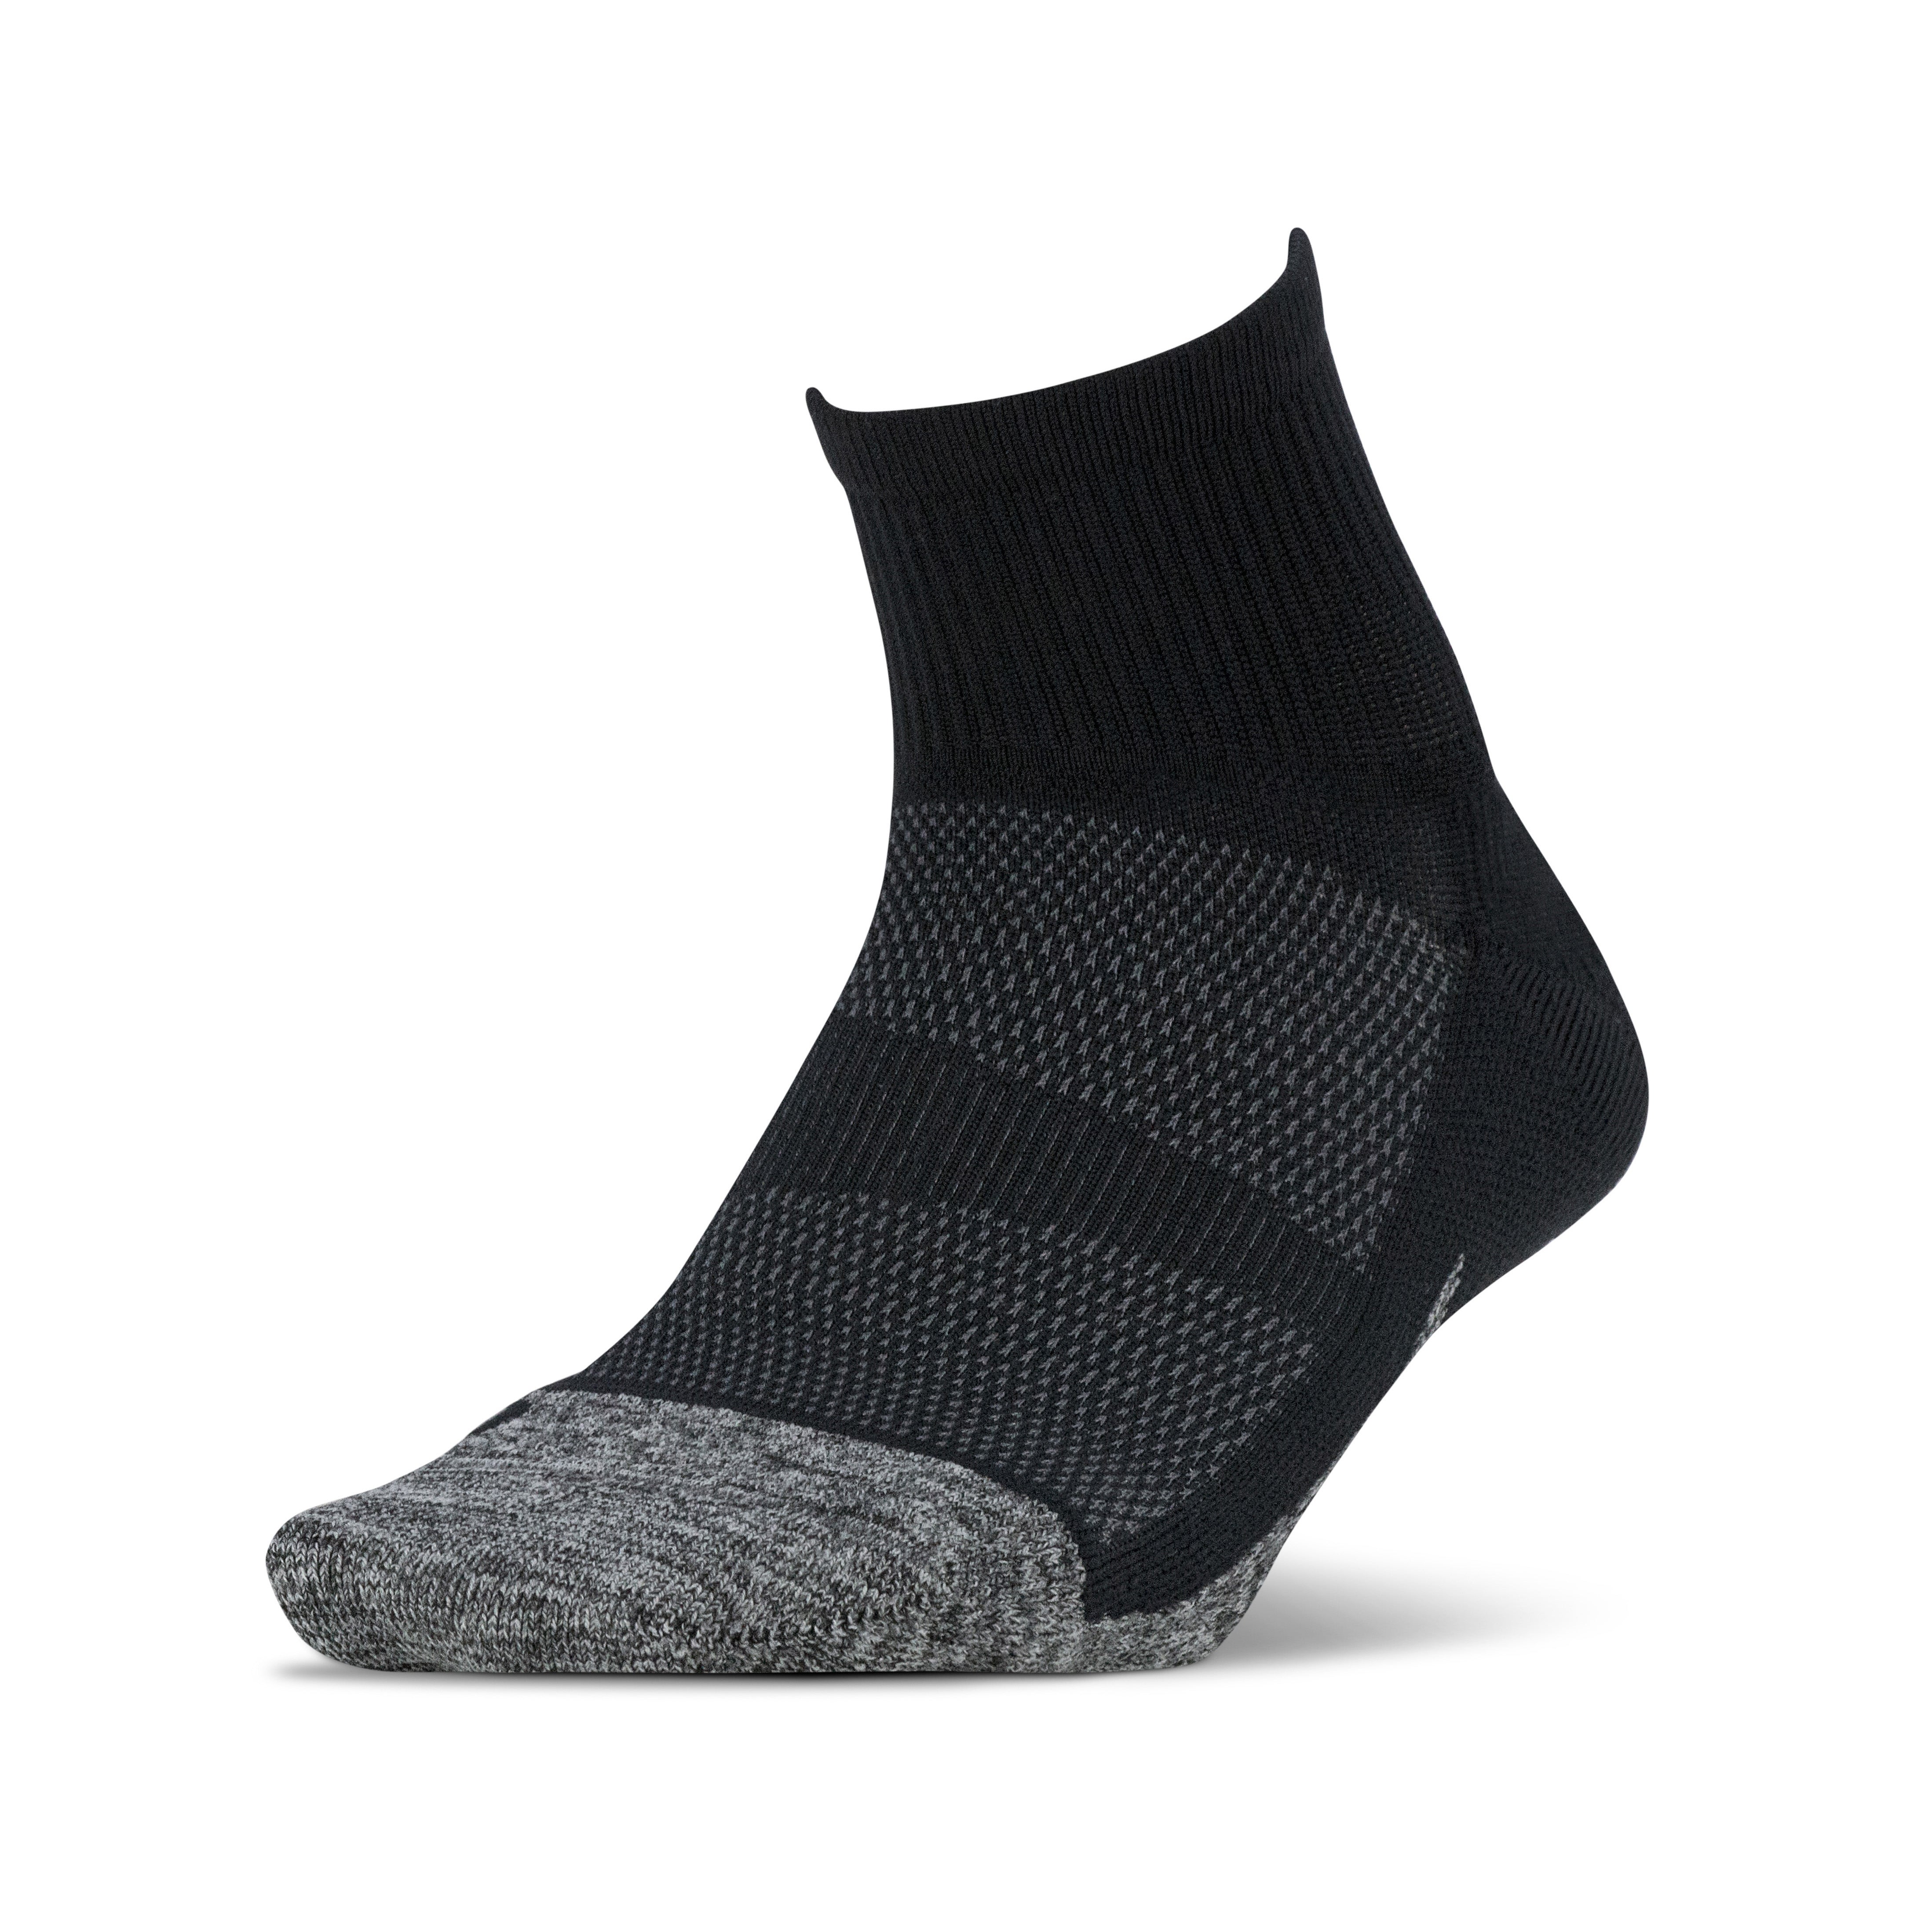 A front view of the left foot wearing a Feetures Elite Light Cushion quarter height sock in the color black